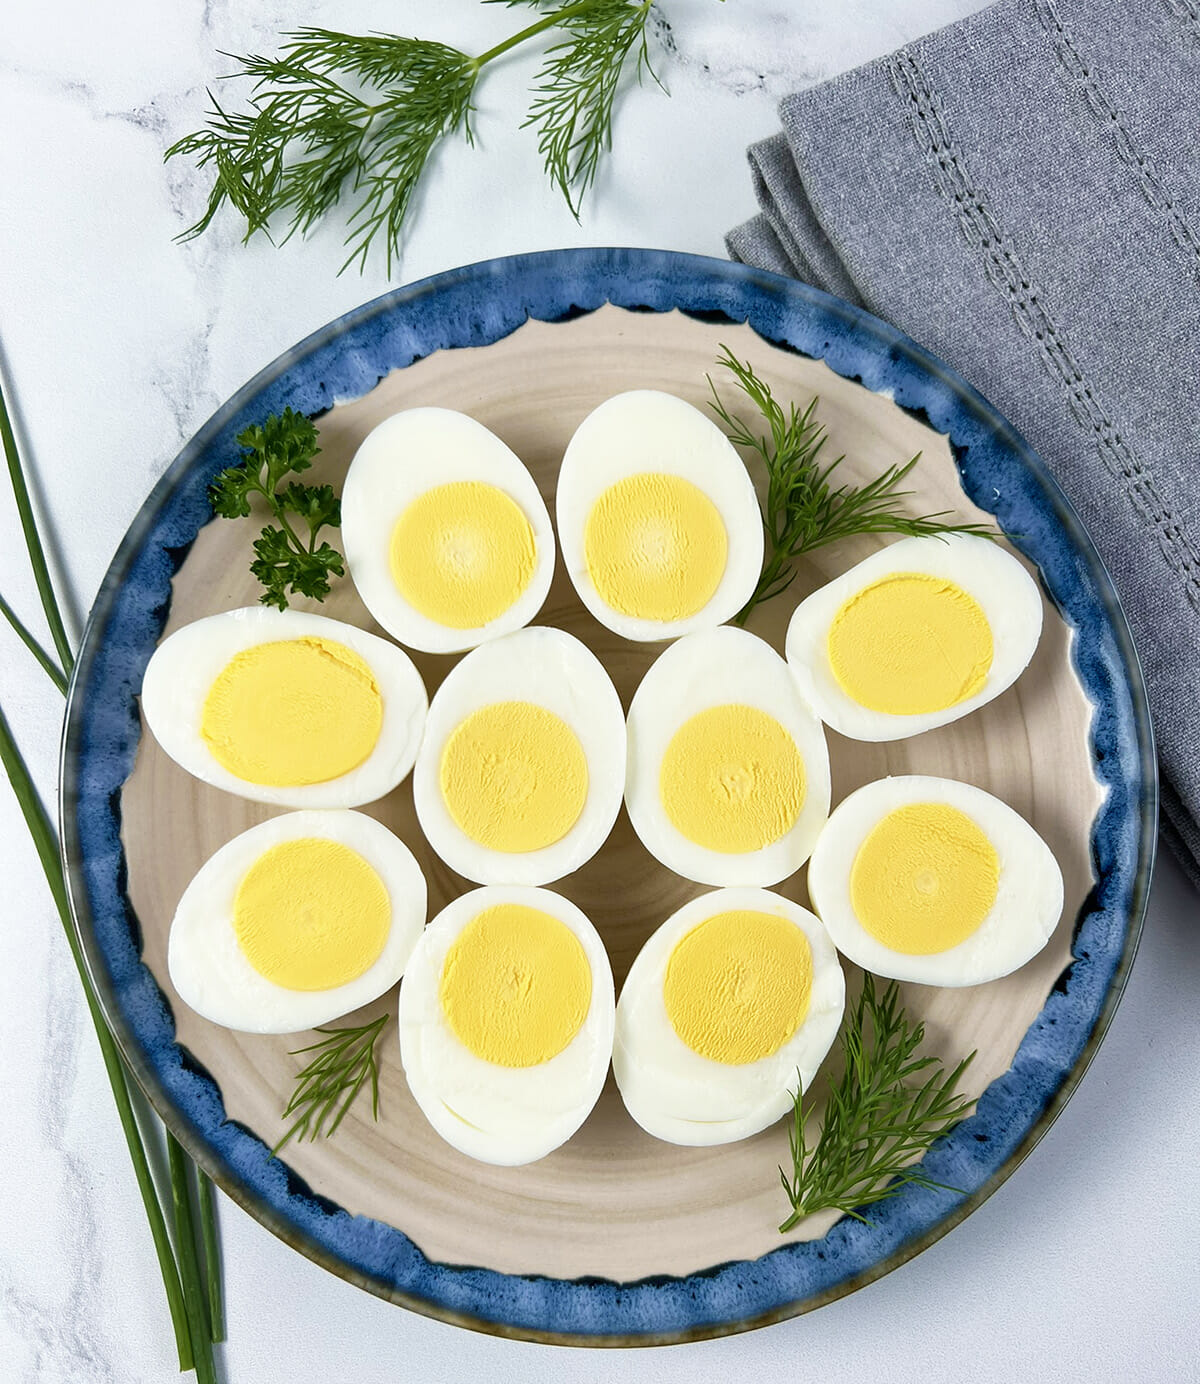 Hard boiled eggs made in an air fryer